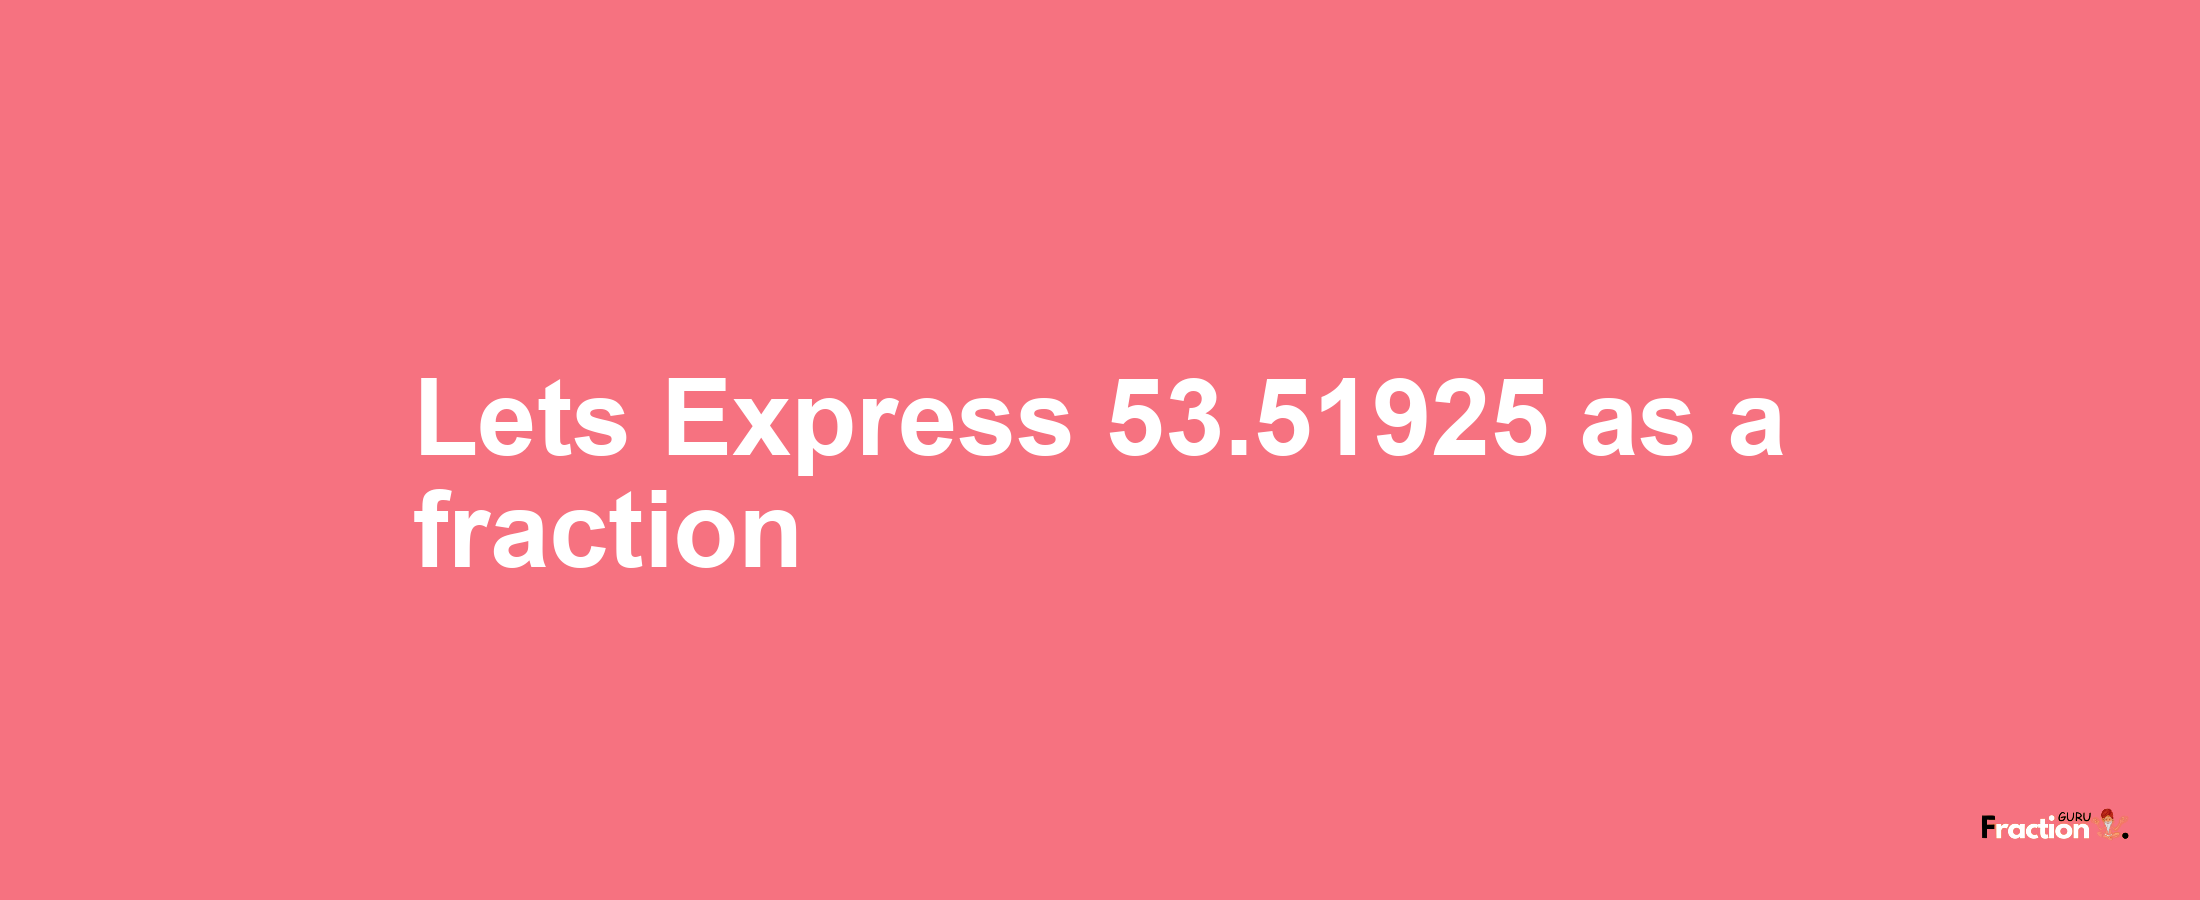 Lets Express 53.51925 as afraction